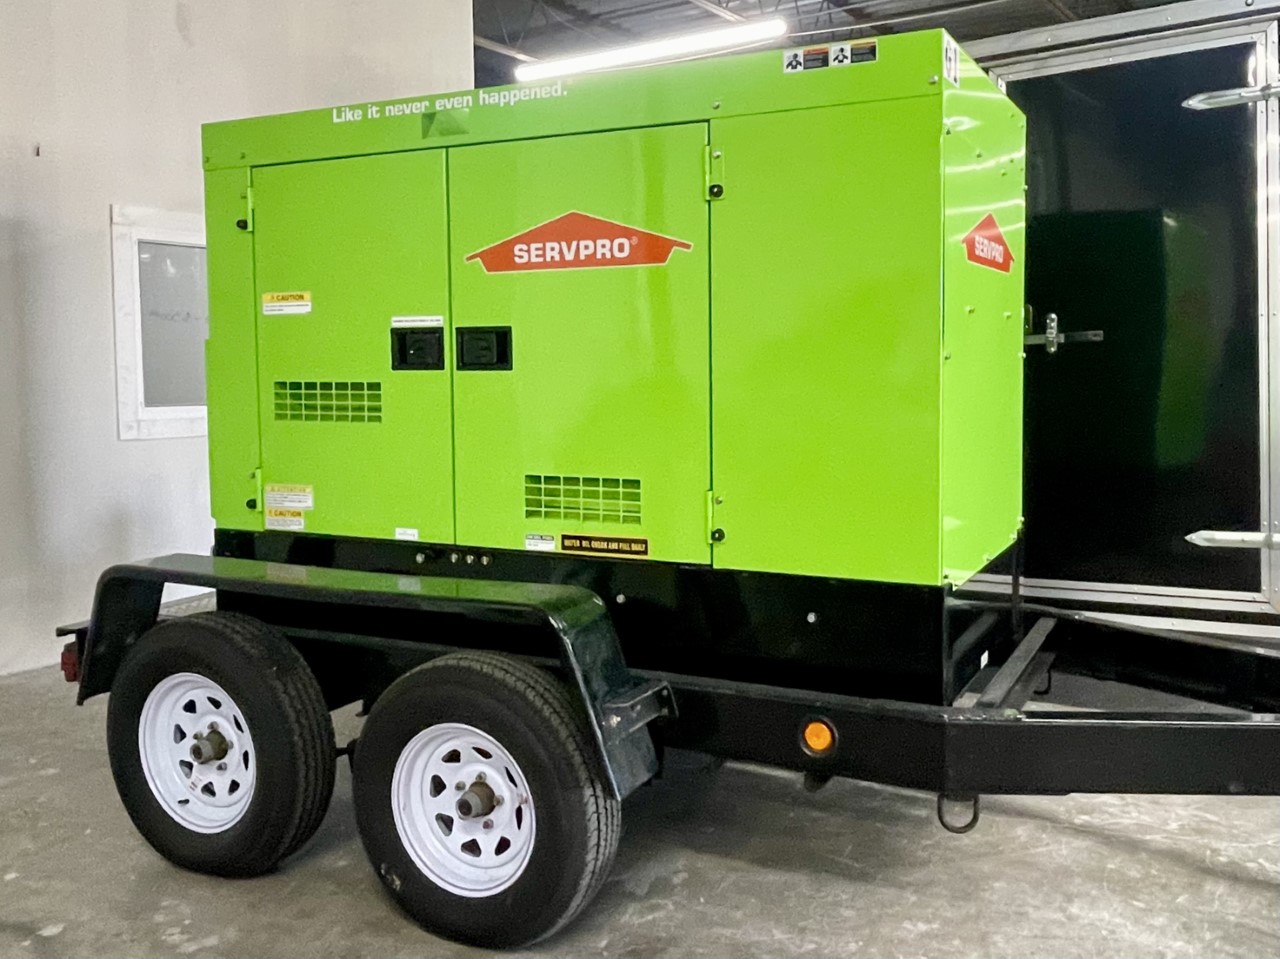 Power generator allows up to set up and assist if and when power is an issue. SERVPRO is prepared for any disaster, any time.